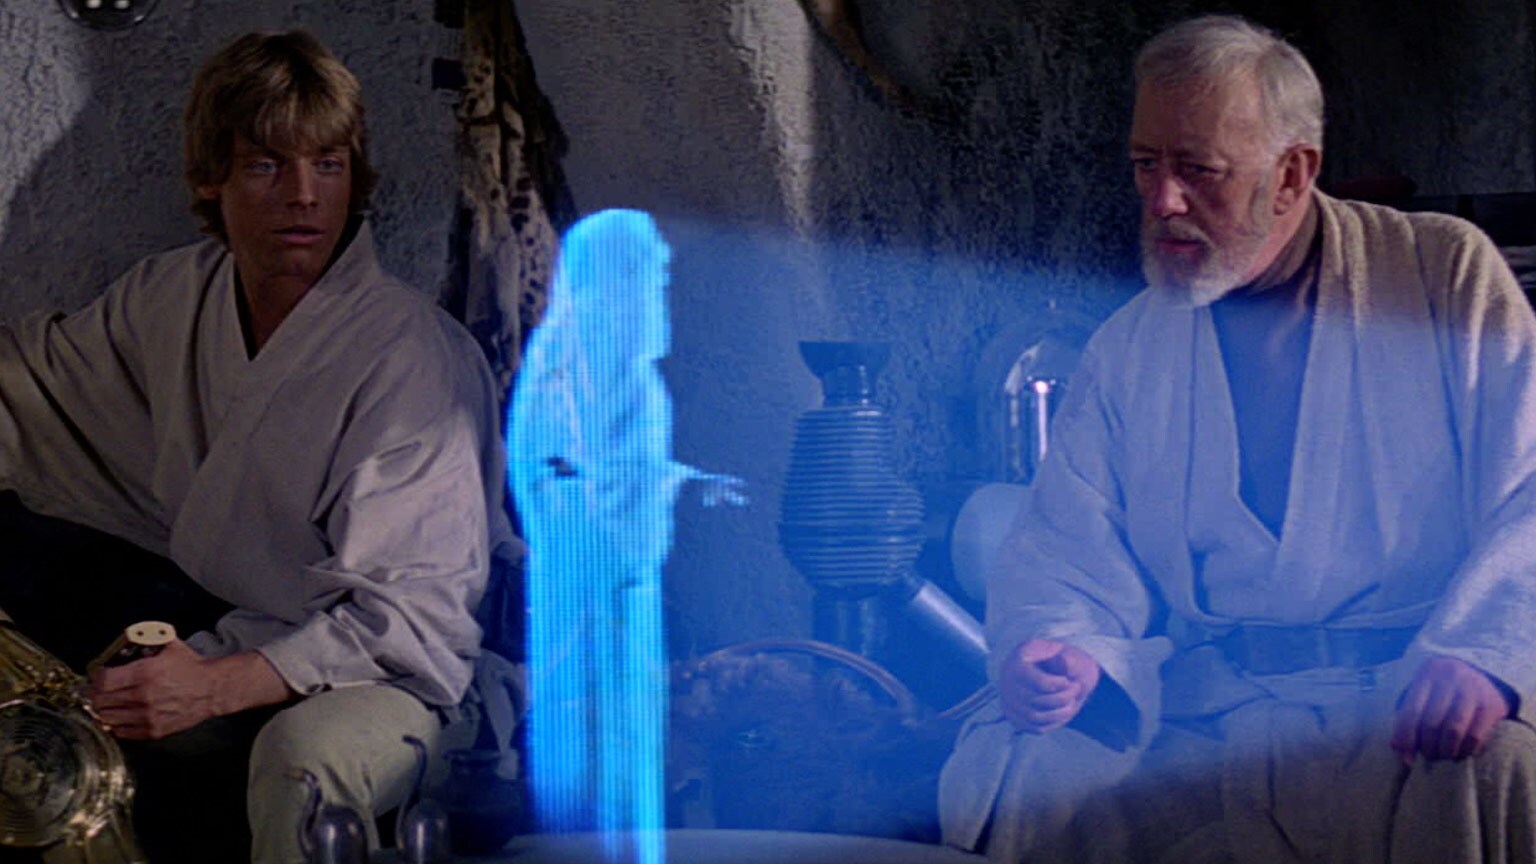 6 Ways Holograms Play an Important Role in Star Wars Storytelling